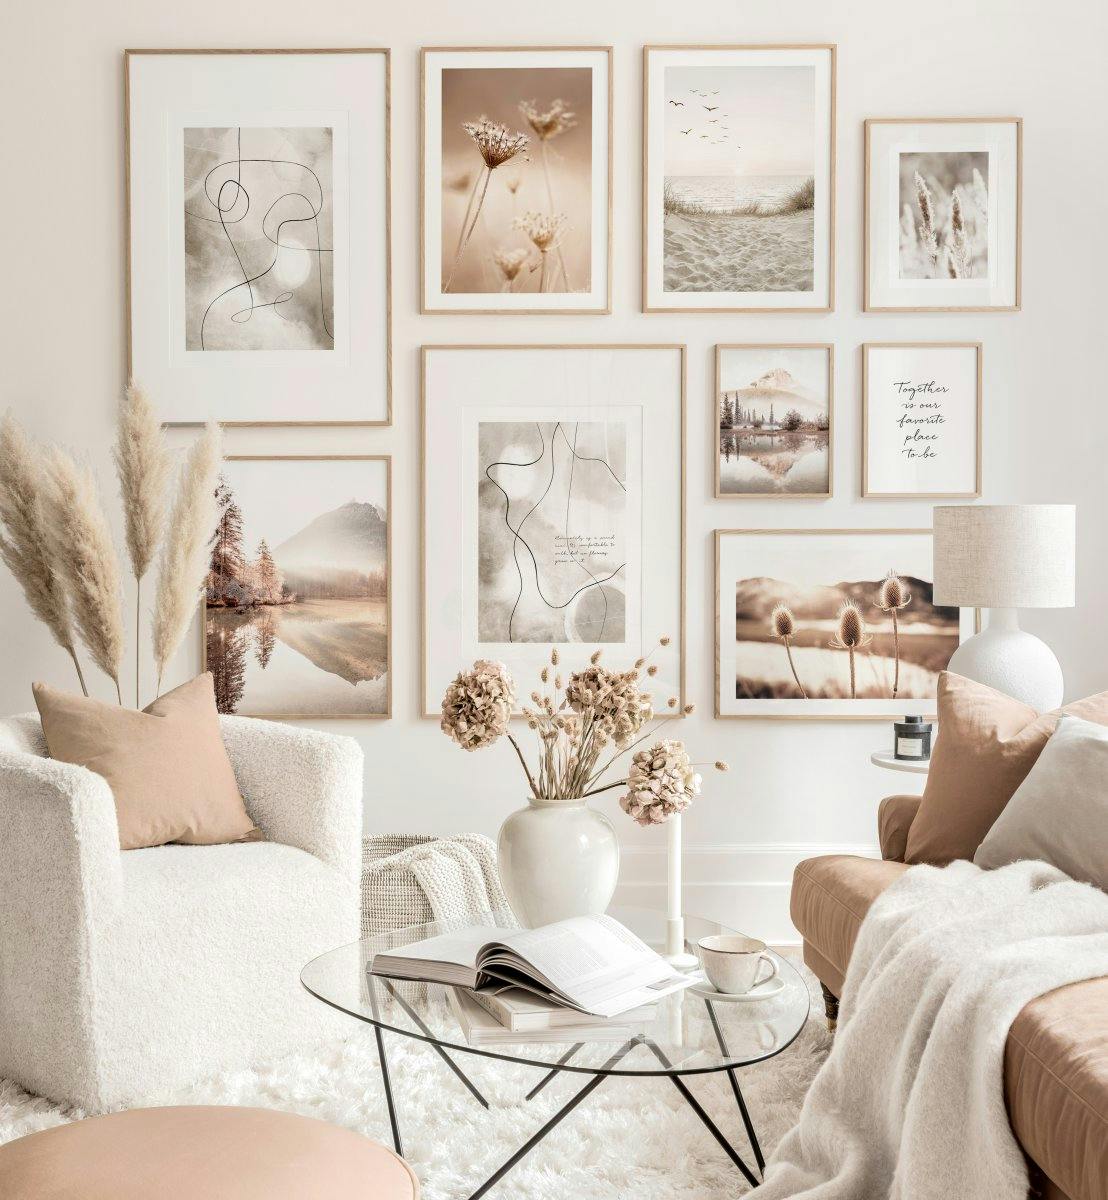 Calm beige gallery wall abstract prints nature posters beige living room ideas